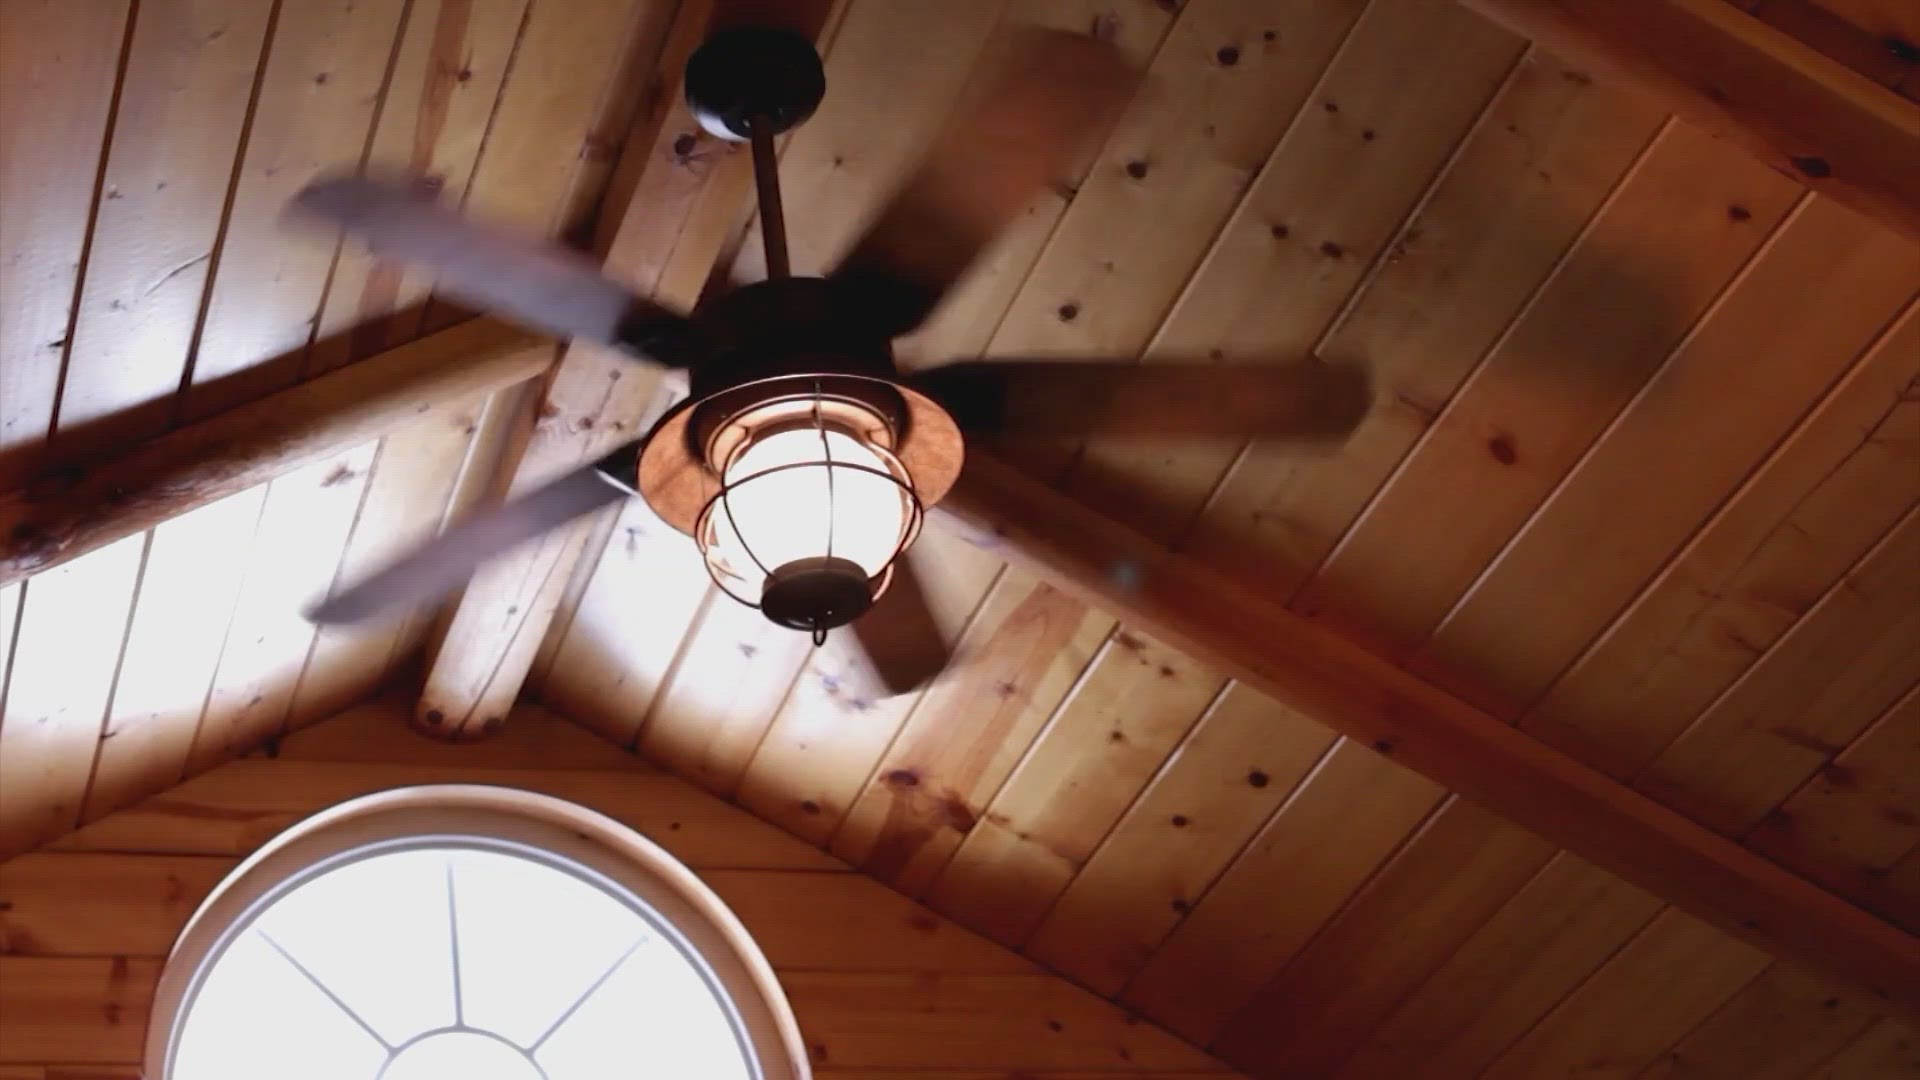 Setting your ceiling fan to spin counterclockwise can help you feel cooler and potentially save you money.